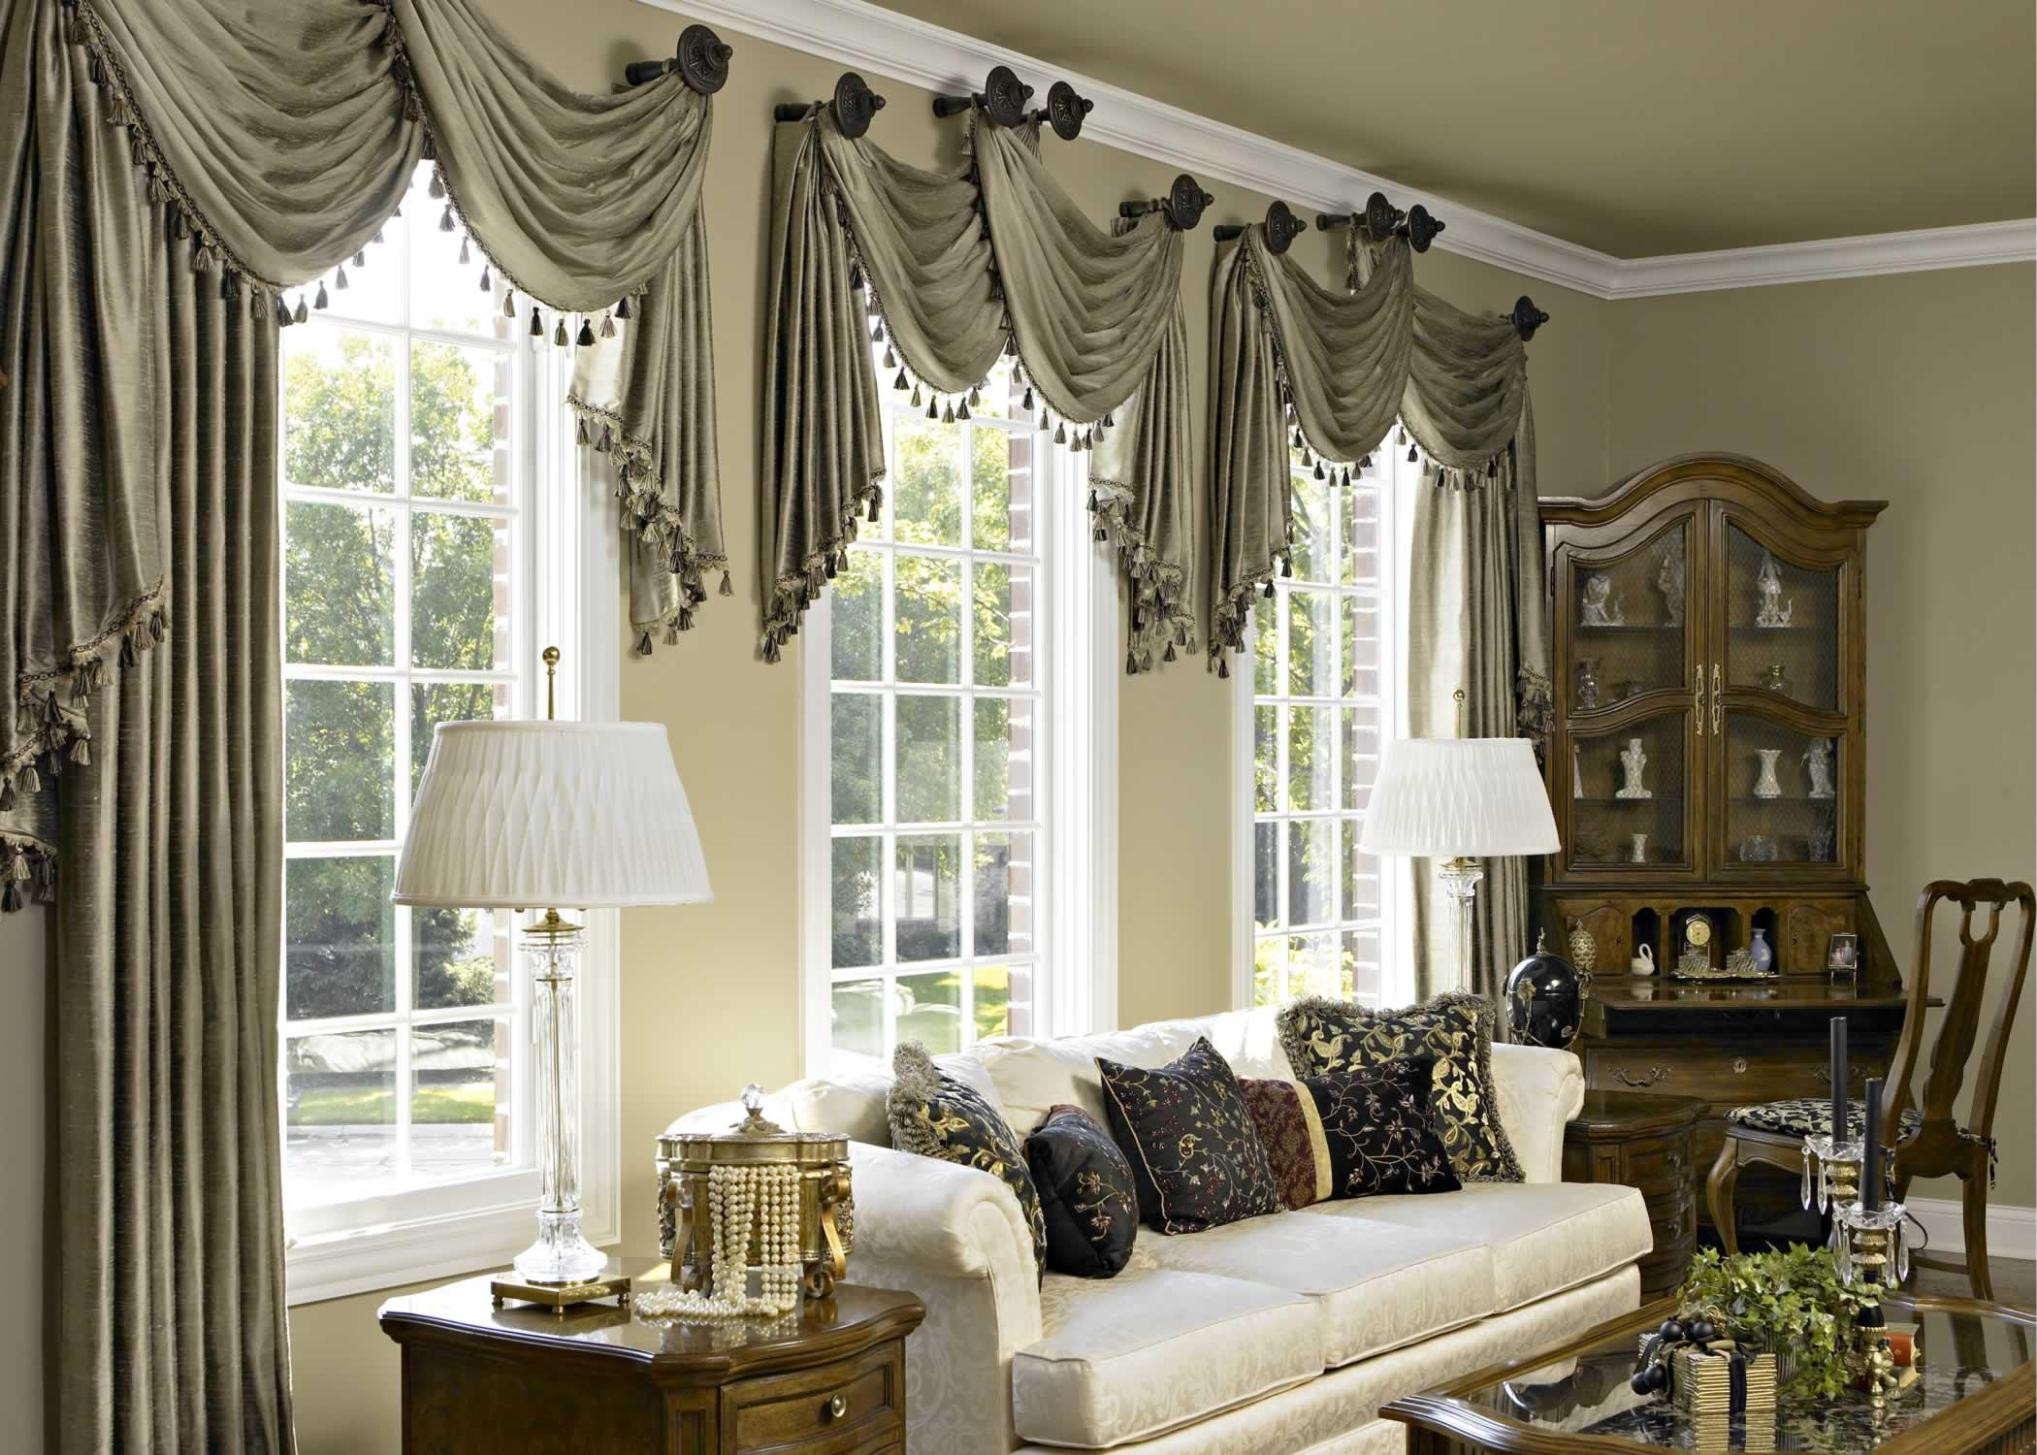 Jcpenney Living Room Curtains
 Luxury Living Room Curtains Jcpenney Curtain Ideas Mini